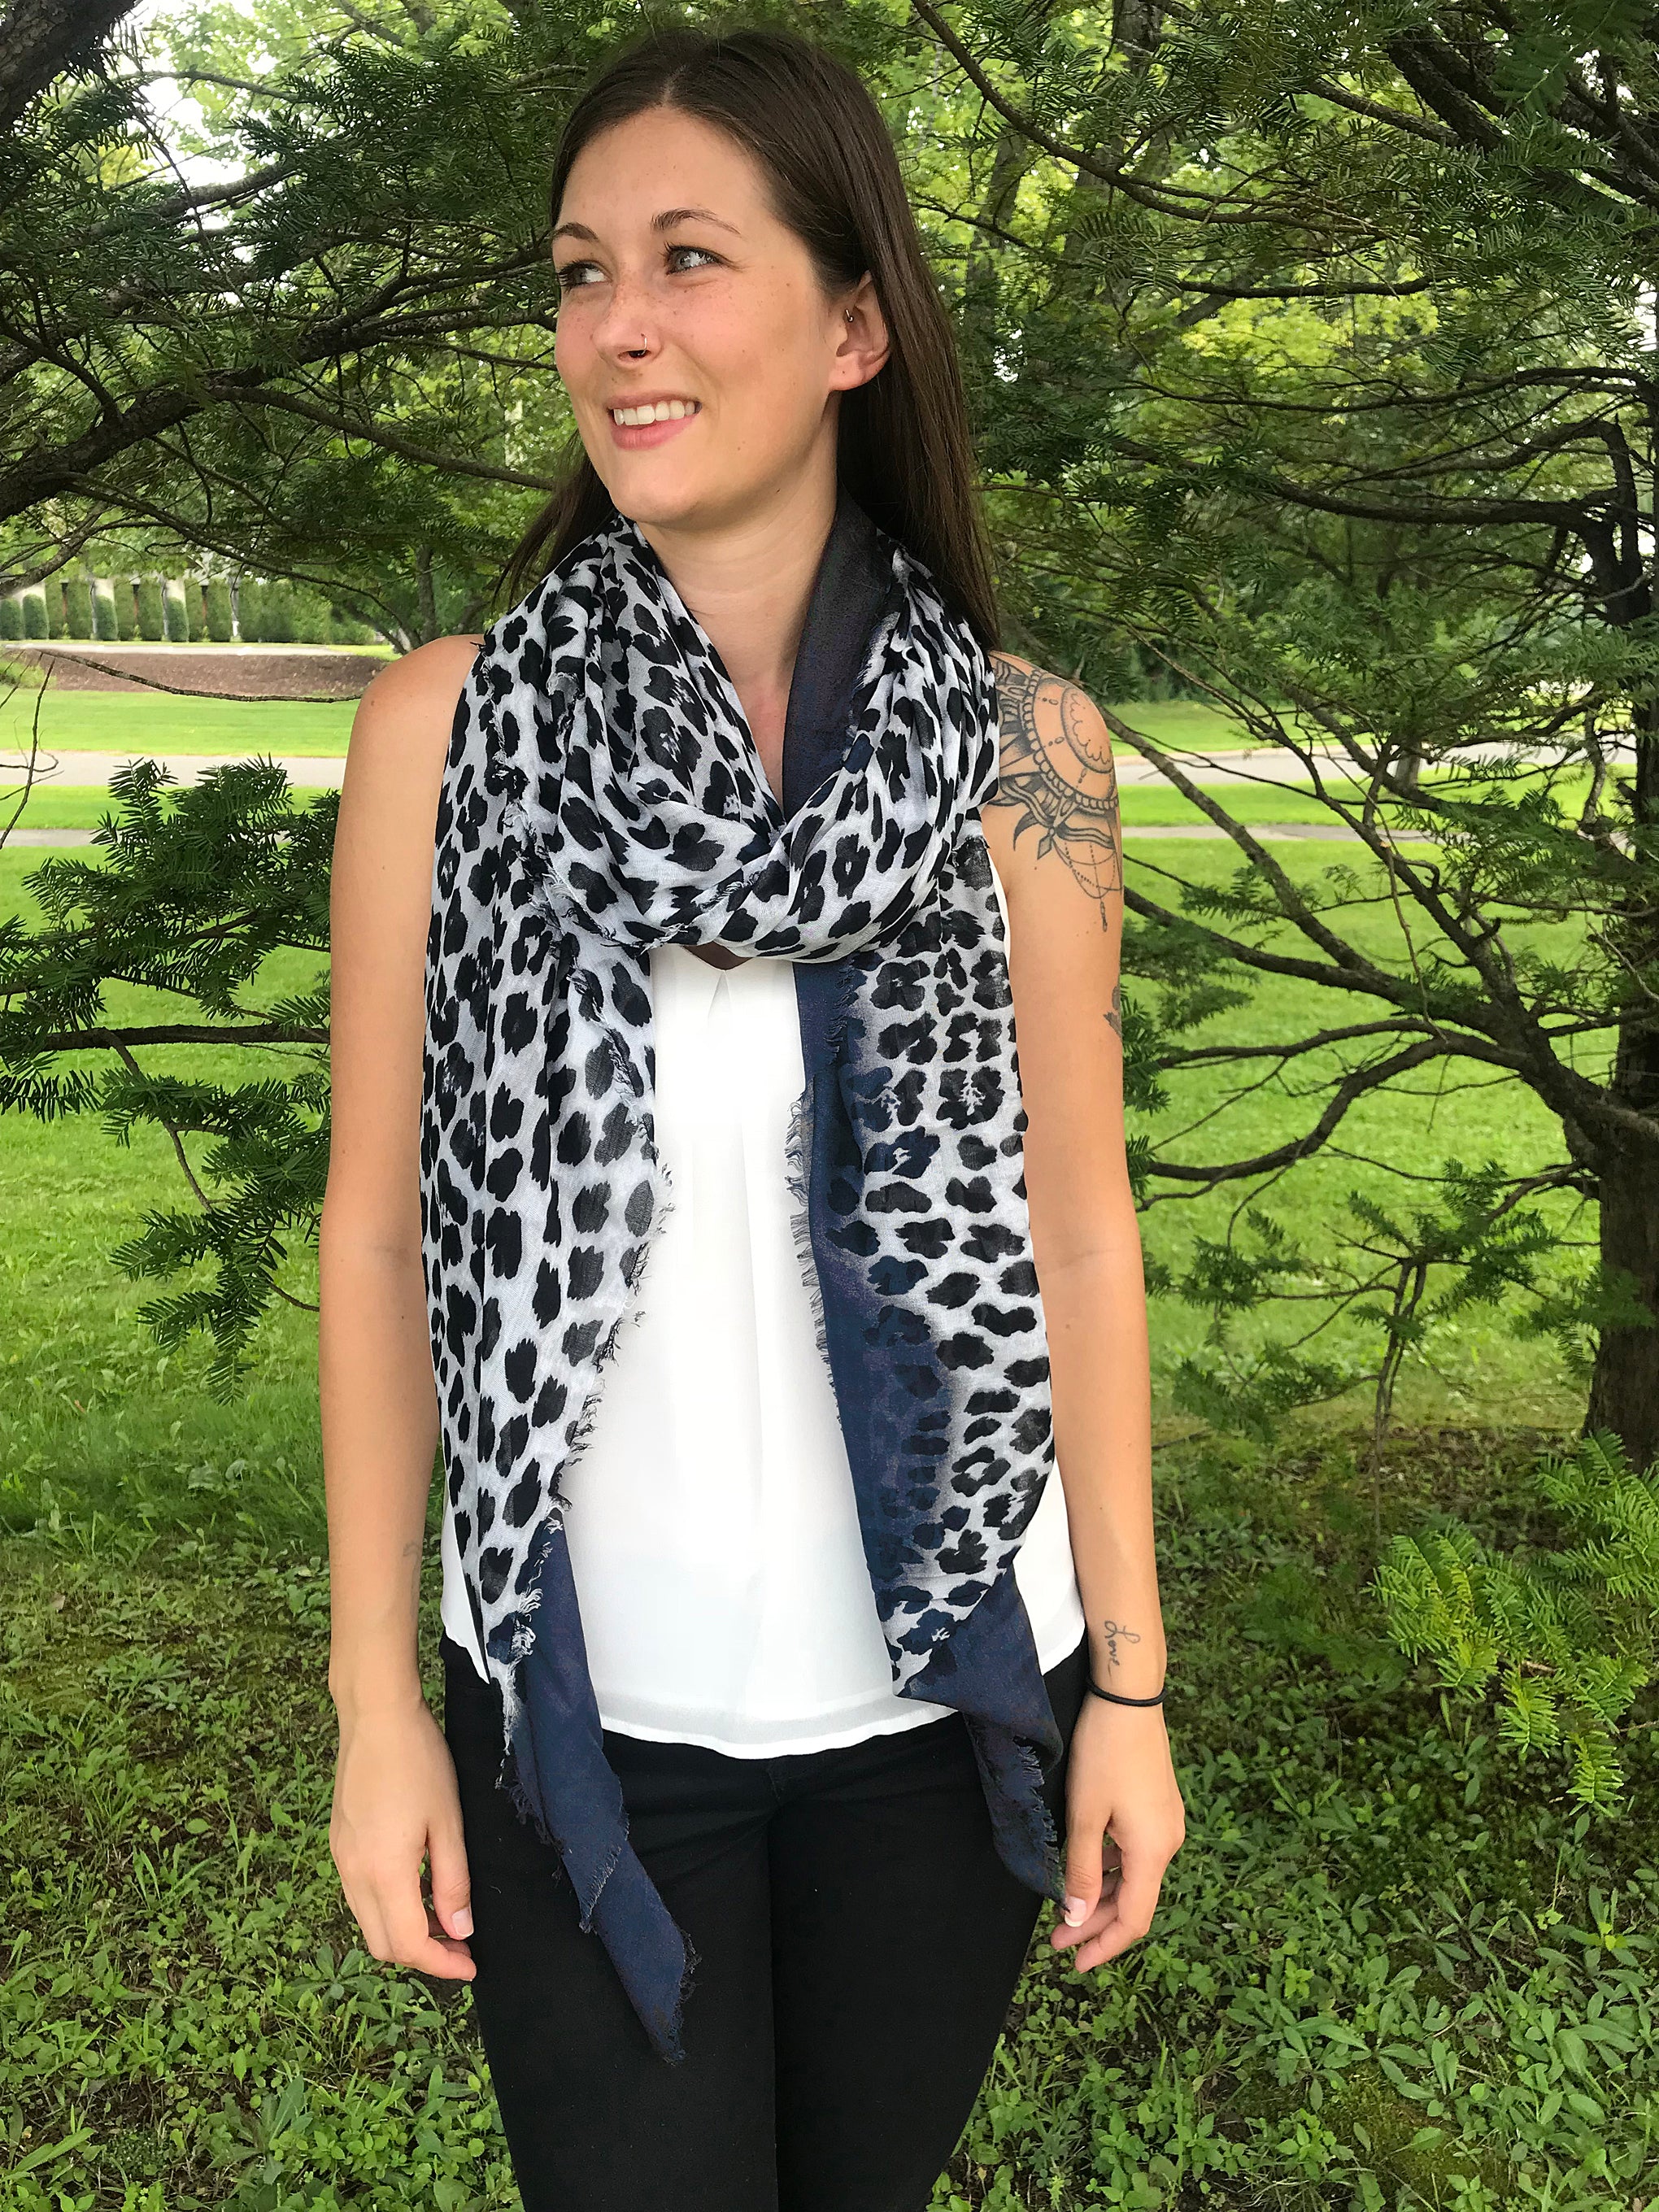 Blue Pacific Animal Print Cashmere and Silk Scarf in Navy and Snow